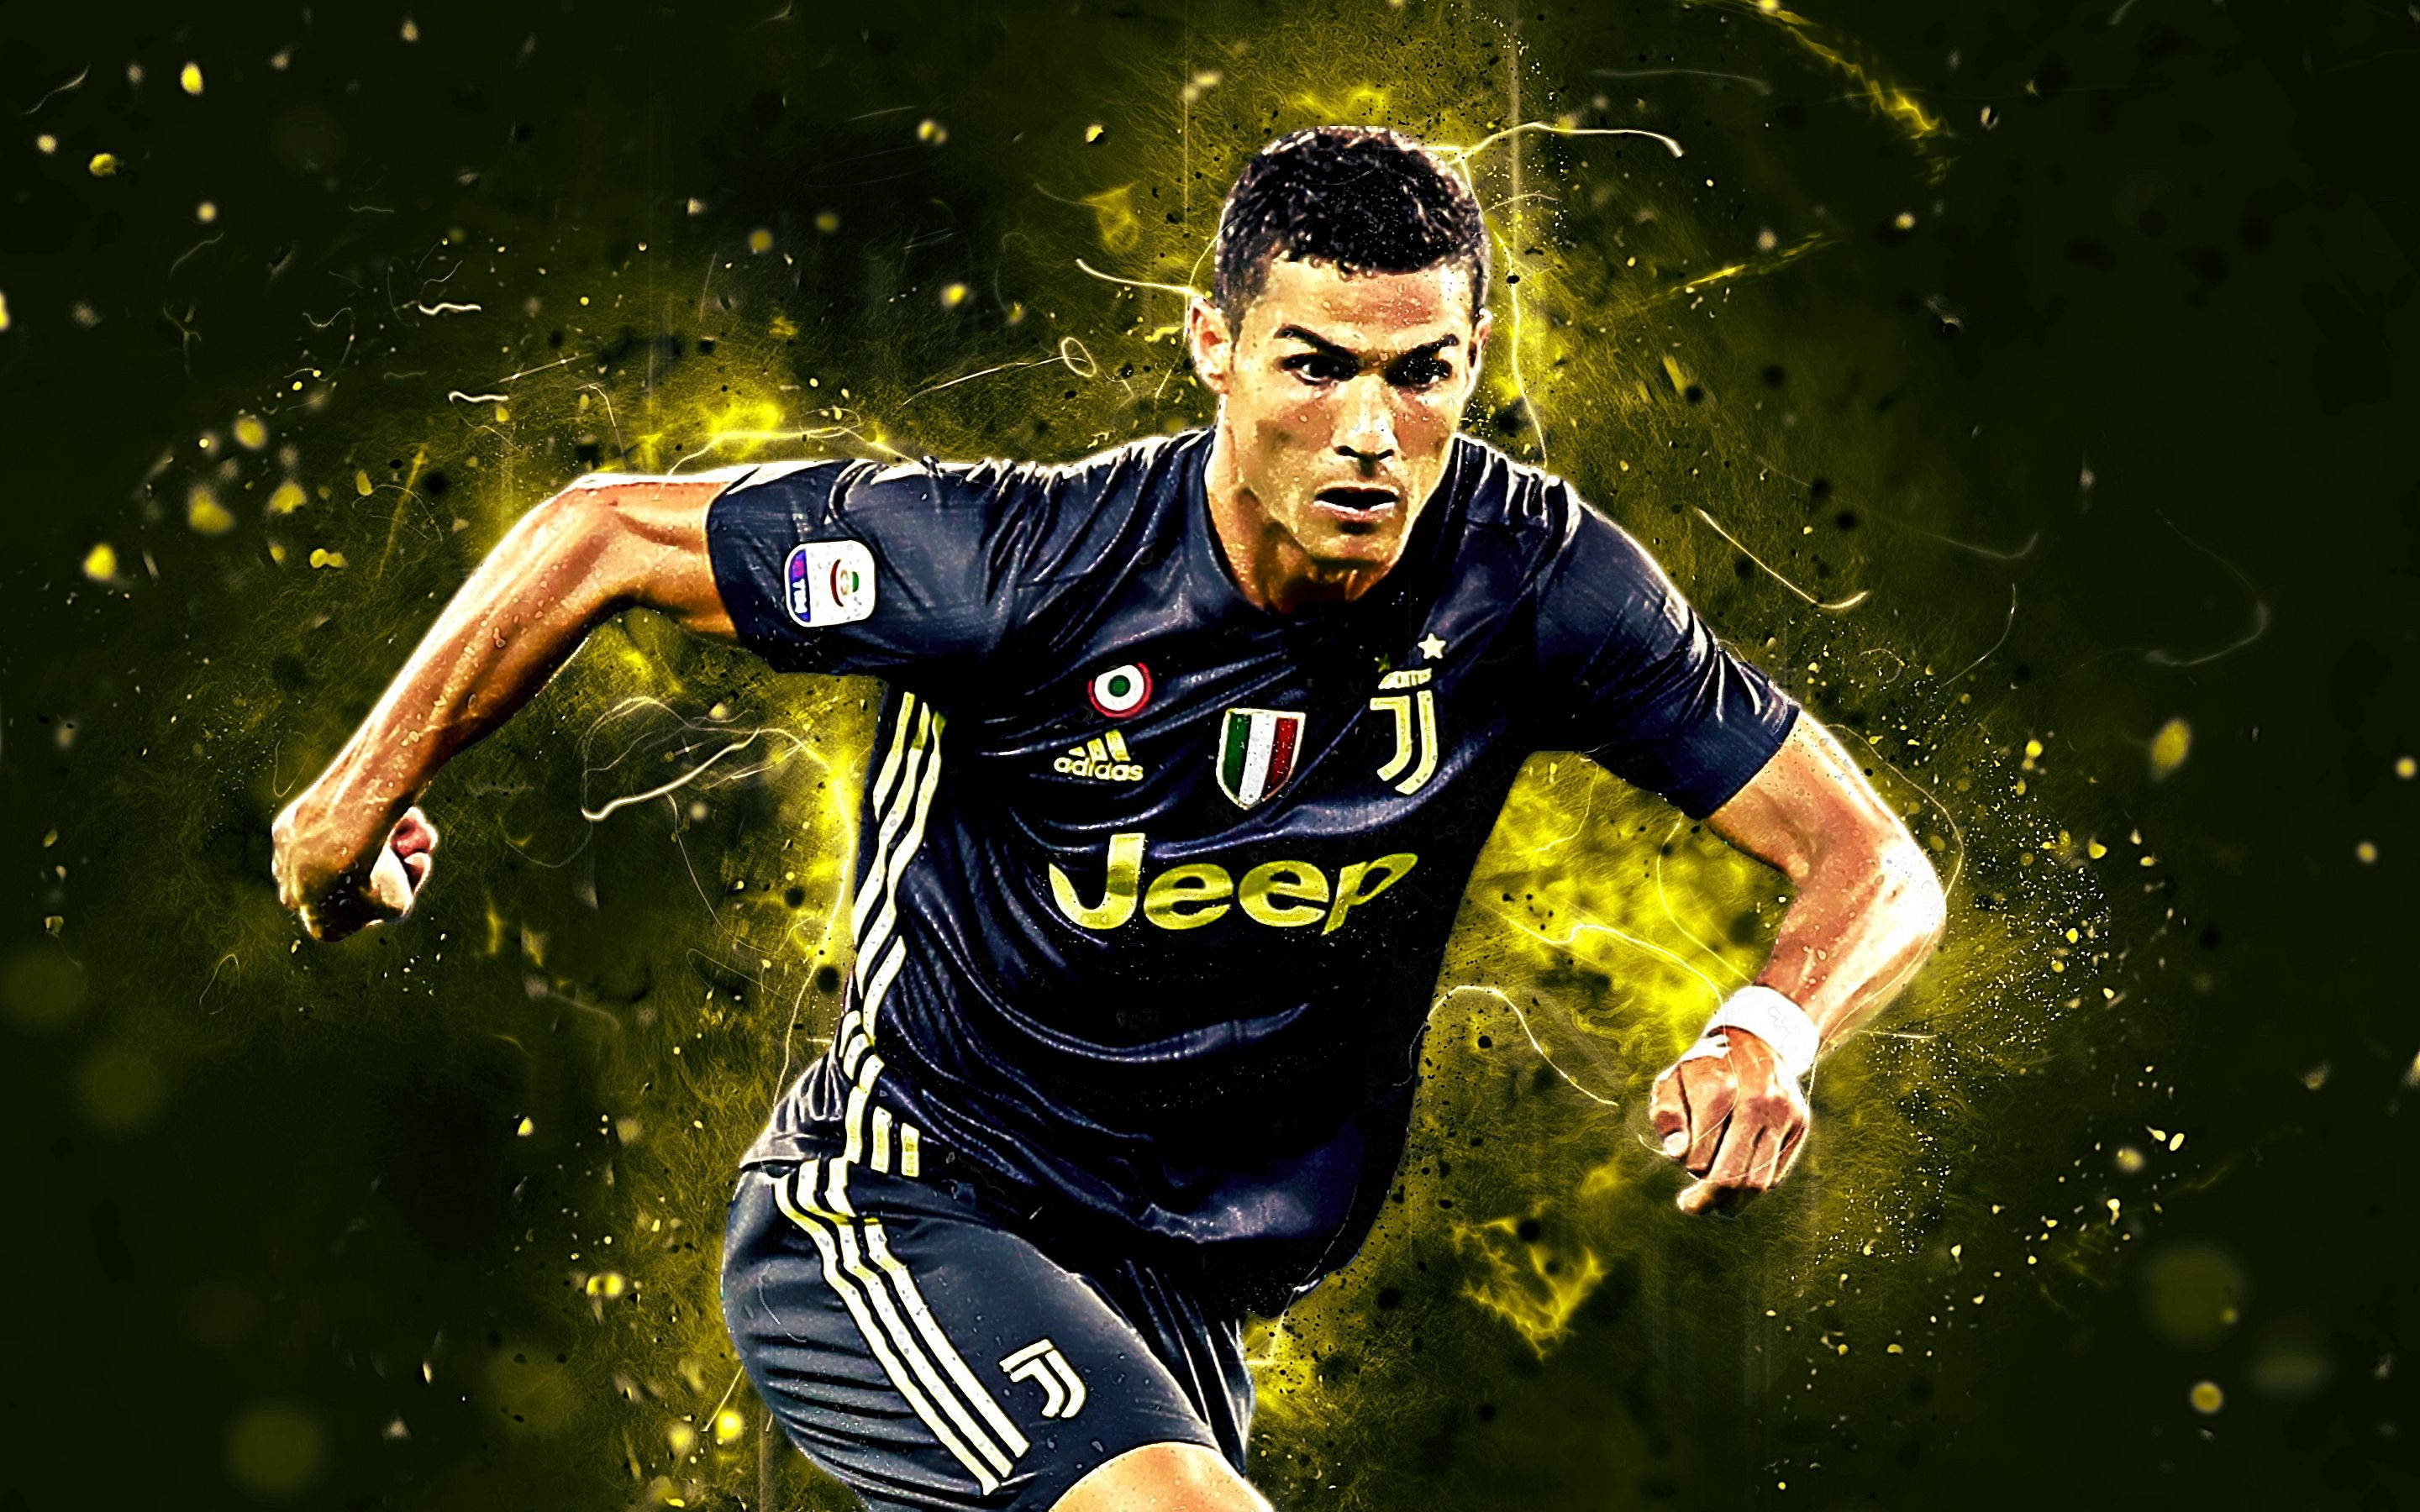 Download Running Cr7 3d Yellow And Black Background Wallpaper | Wallpapers .com